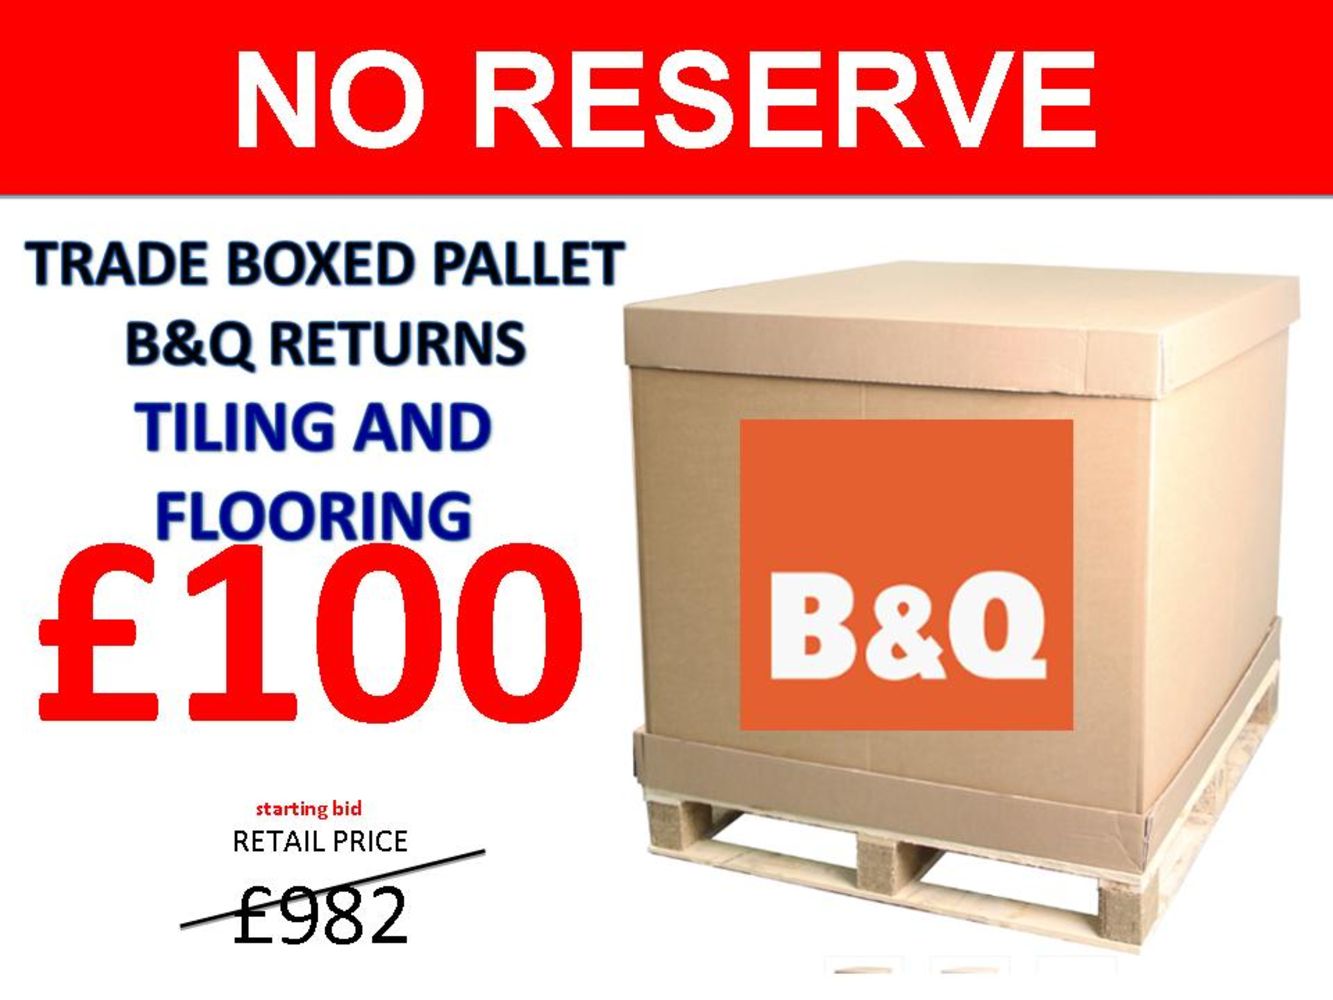 Pallet Sale of B&Q Raw Returns - Starting Bids at 10% of Retail Value - Opportunity for Huge Savings